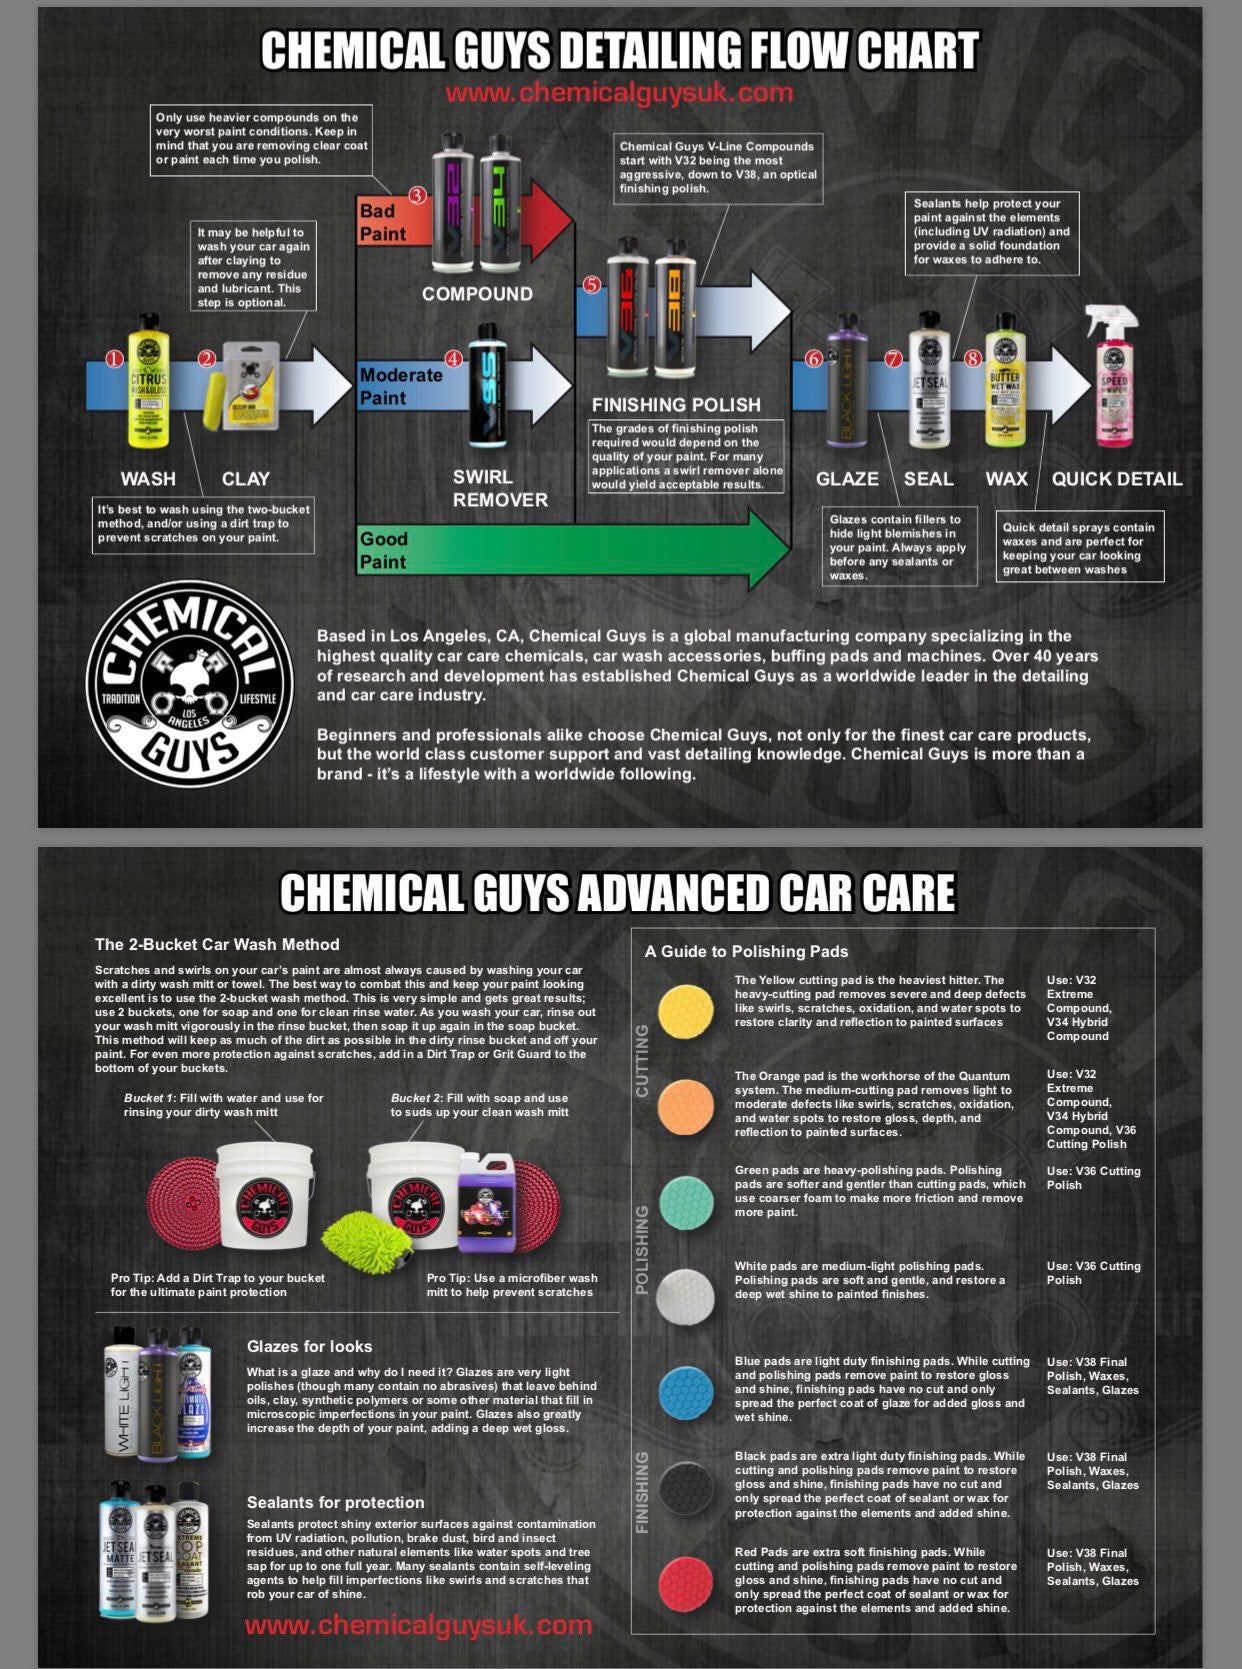 Chemical Guys - DetailingWiki, the free wiki for detailers